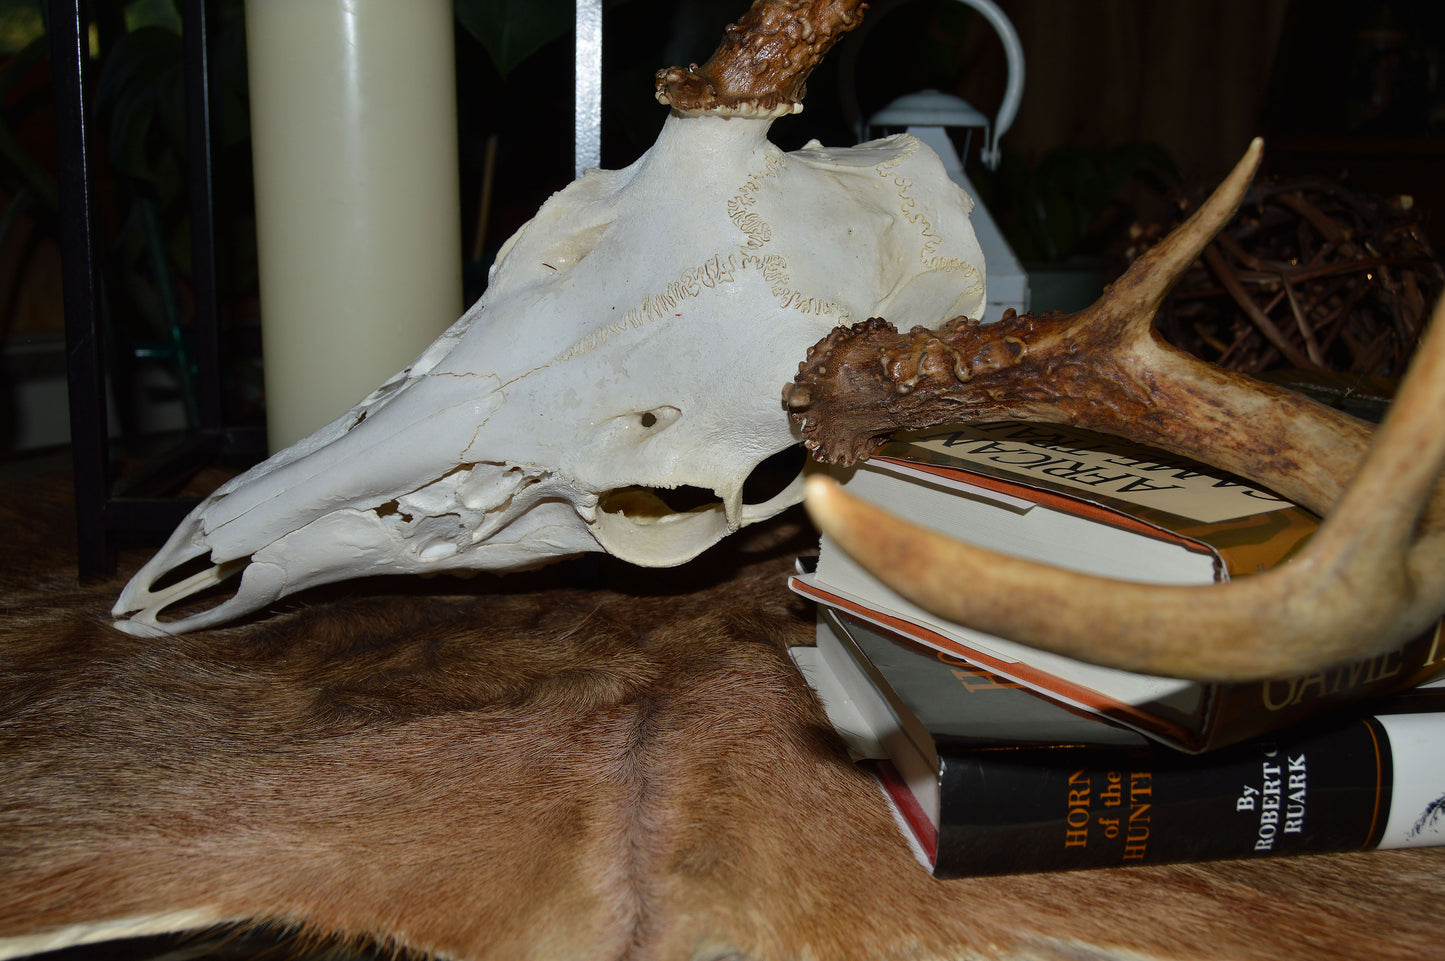 Whitetail Deer skull and antlers